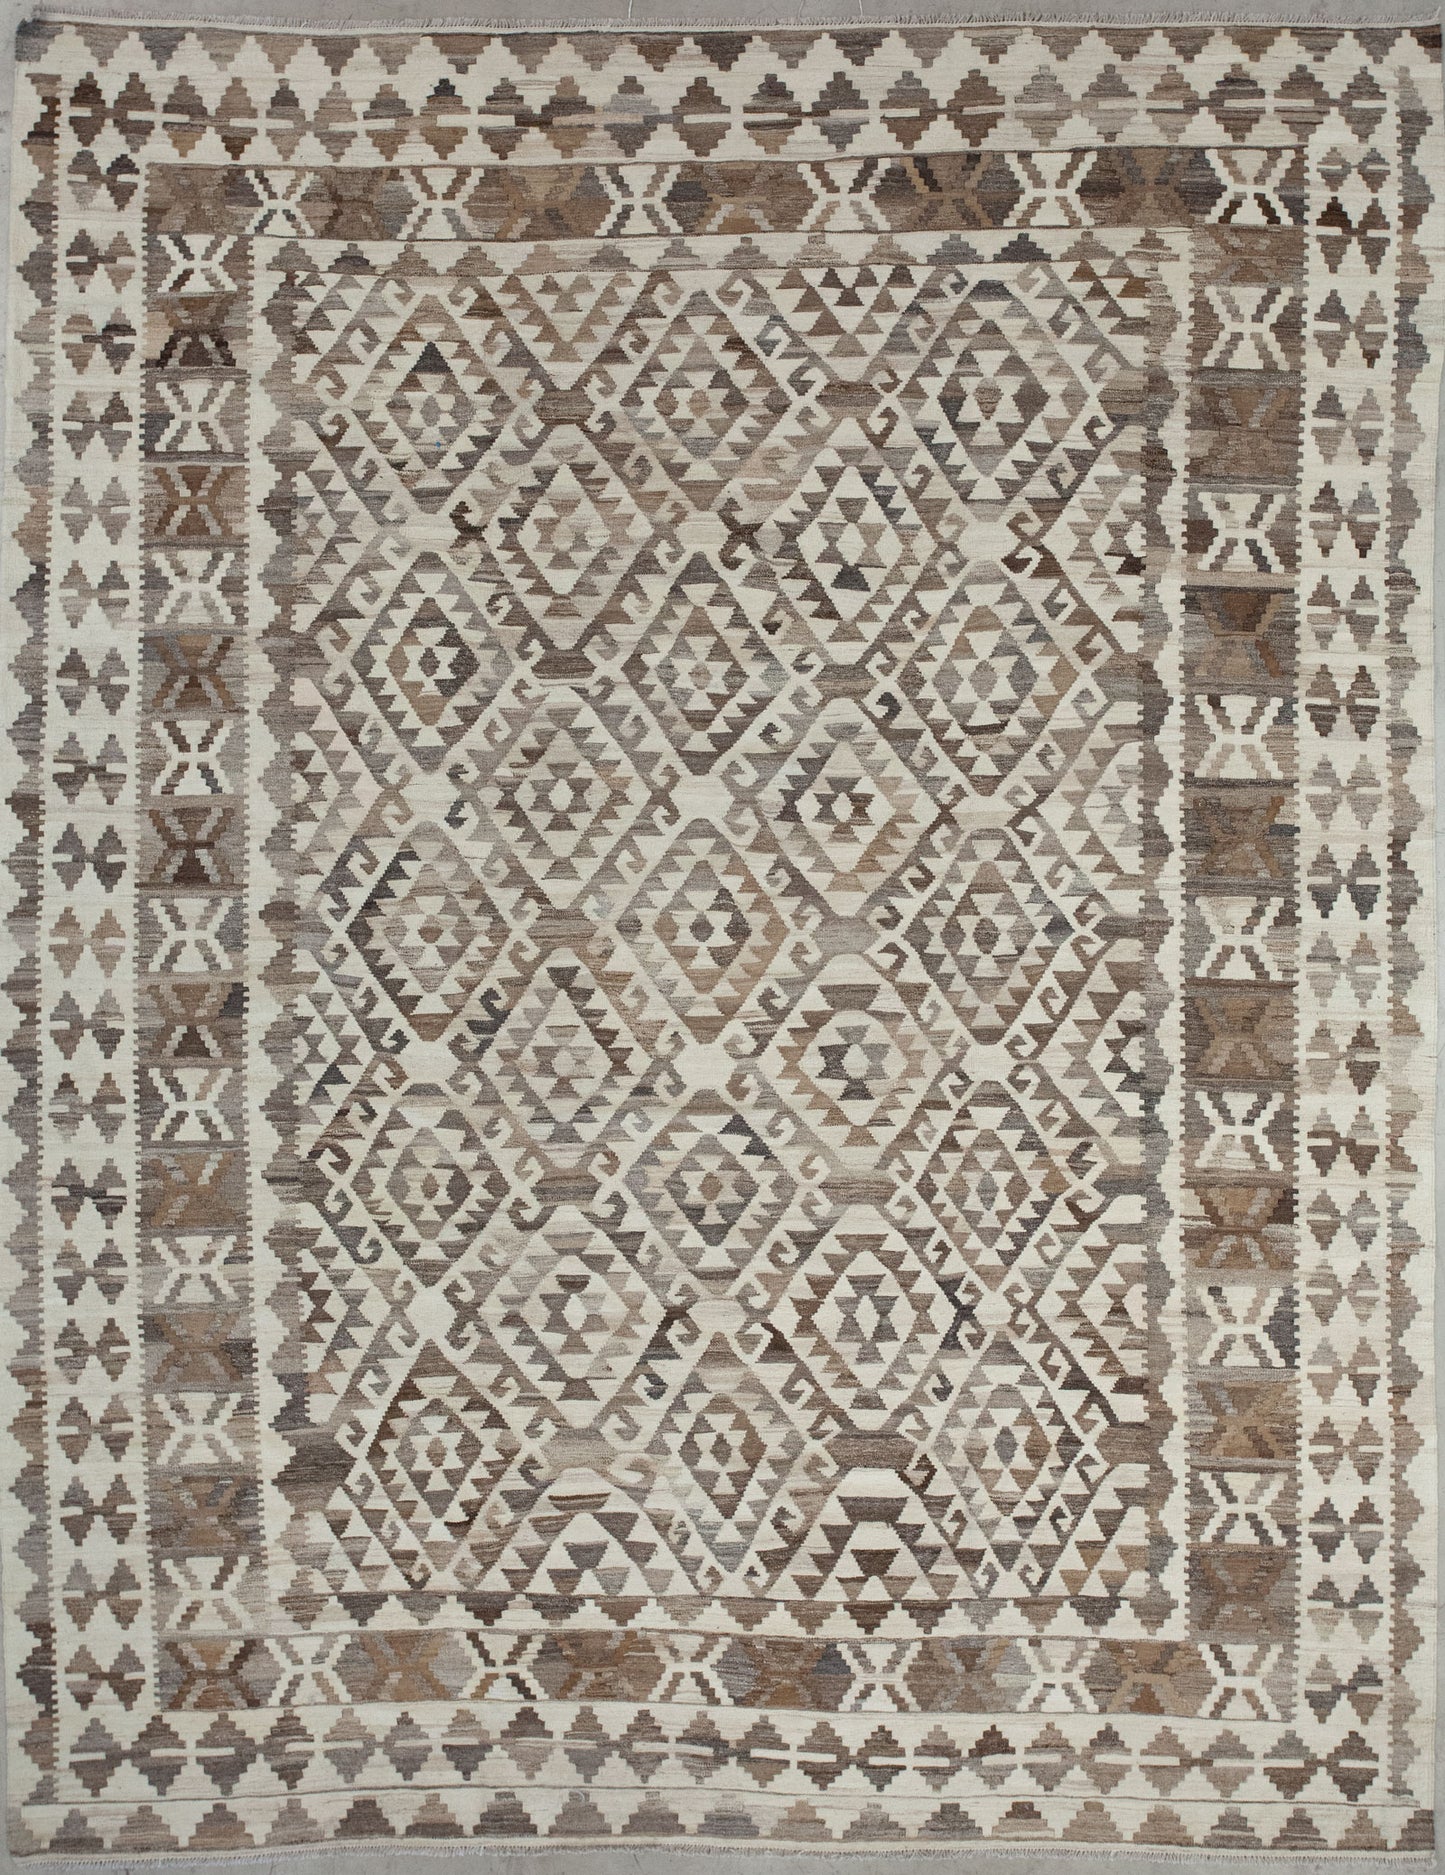 This carpet comes with beige background and a greco roman pattern in gray and brown. 